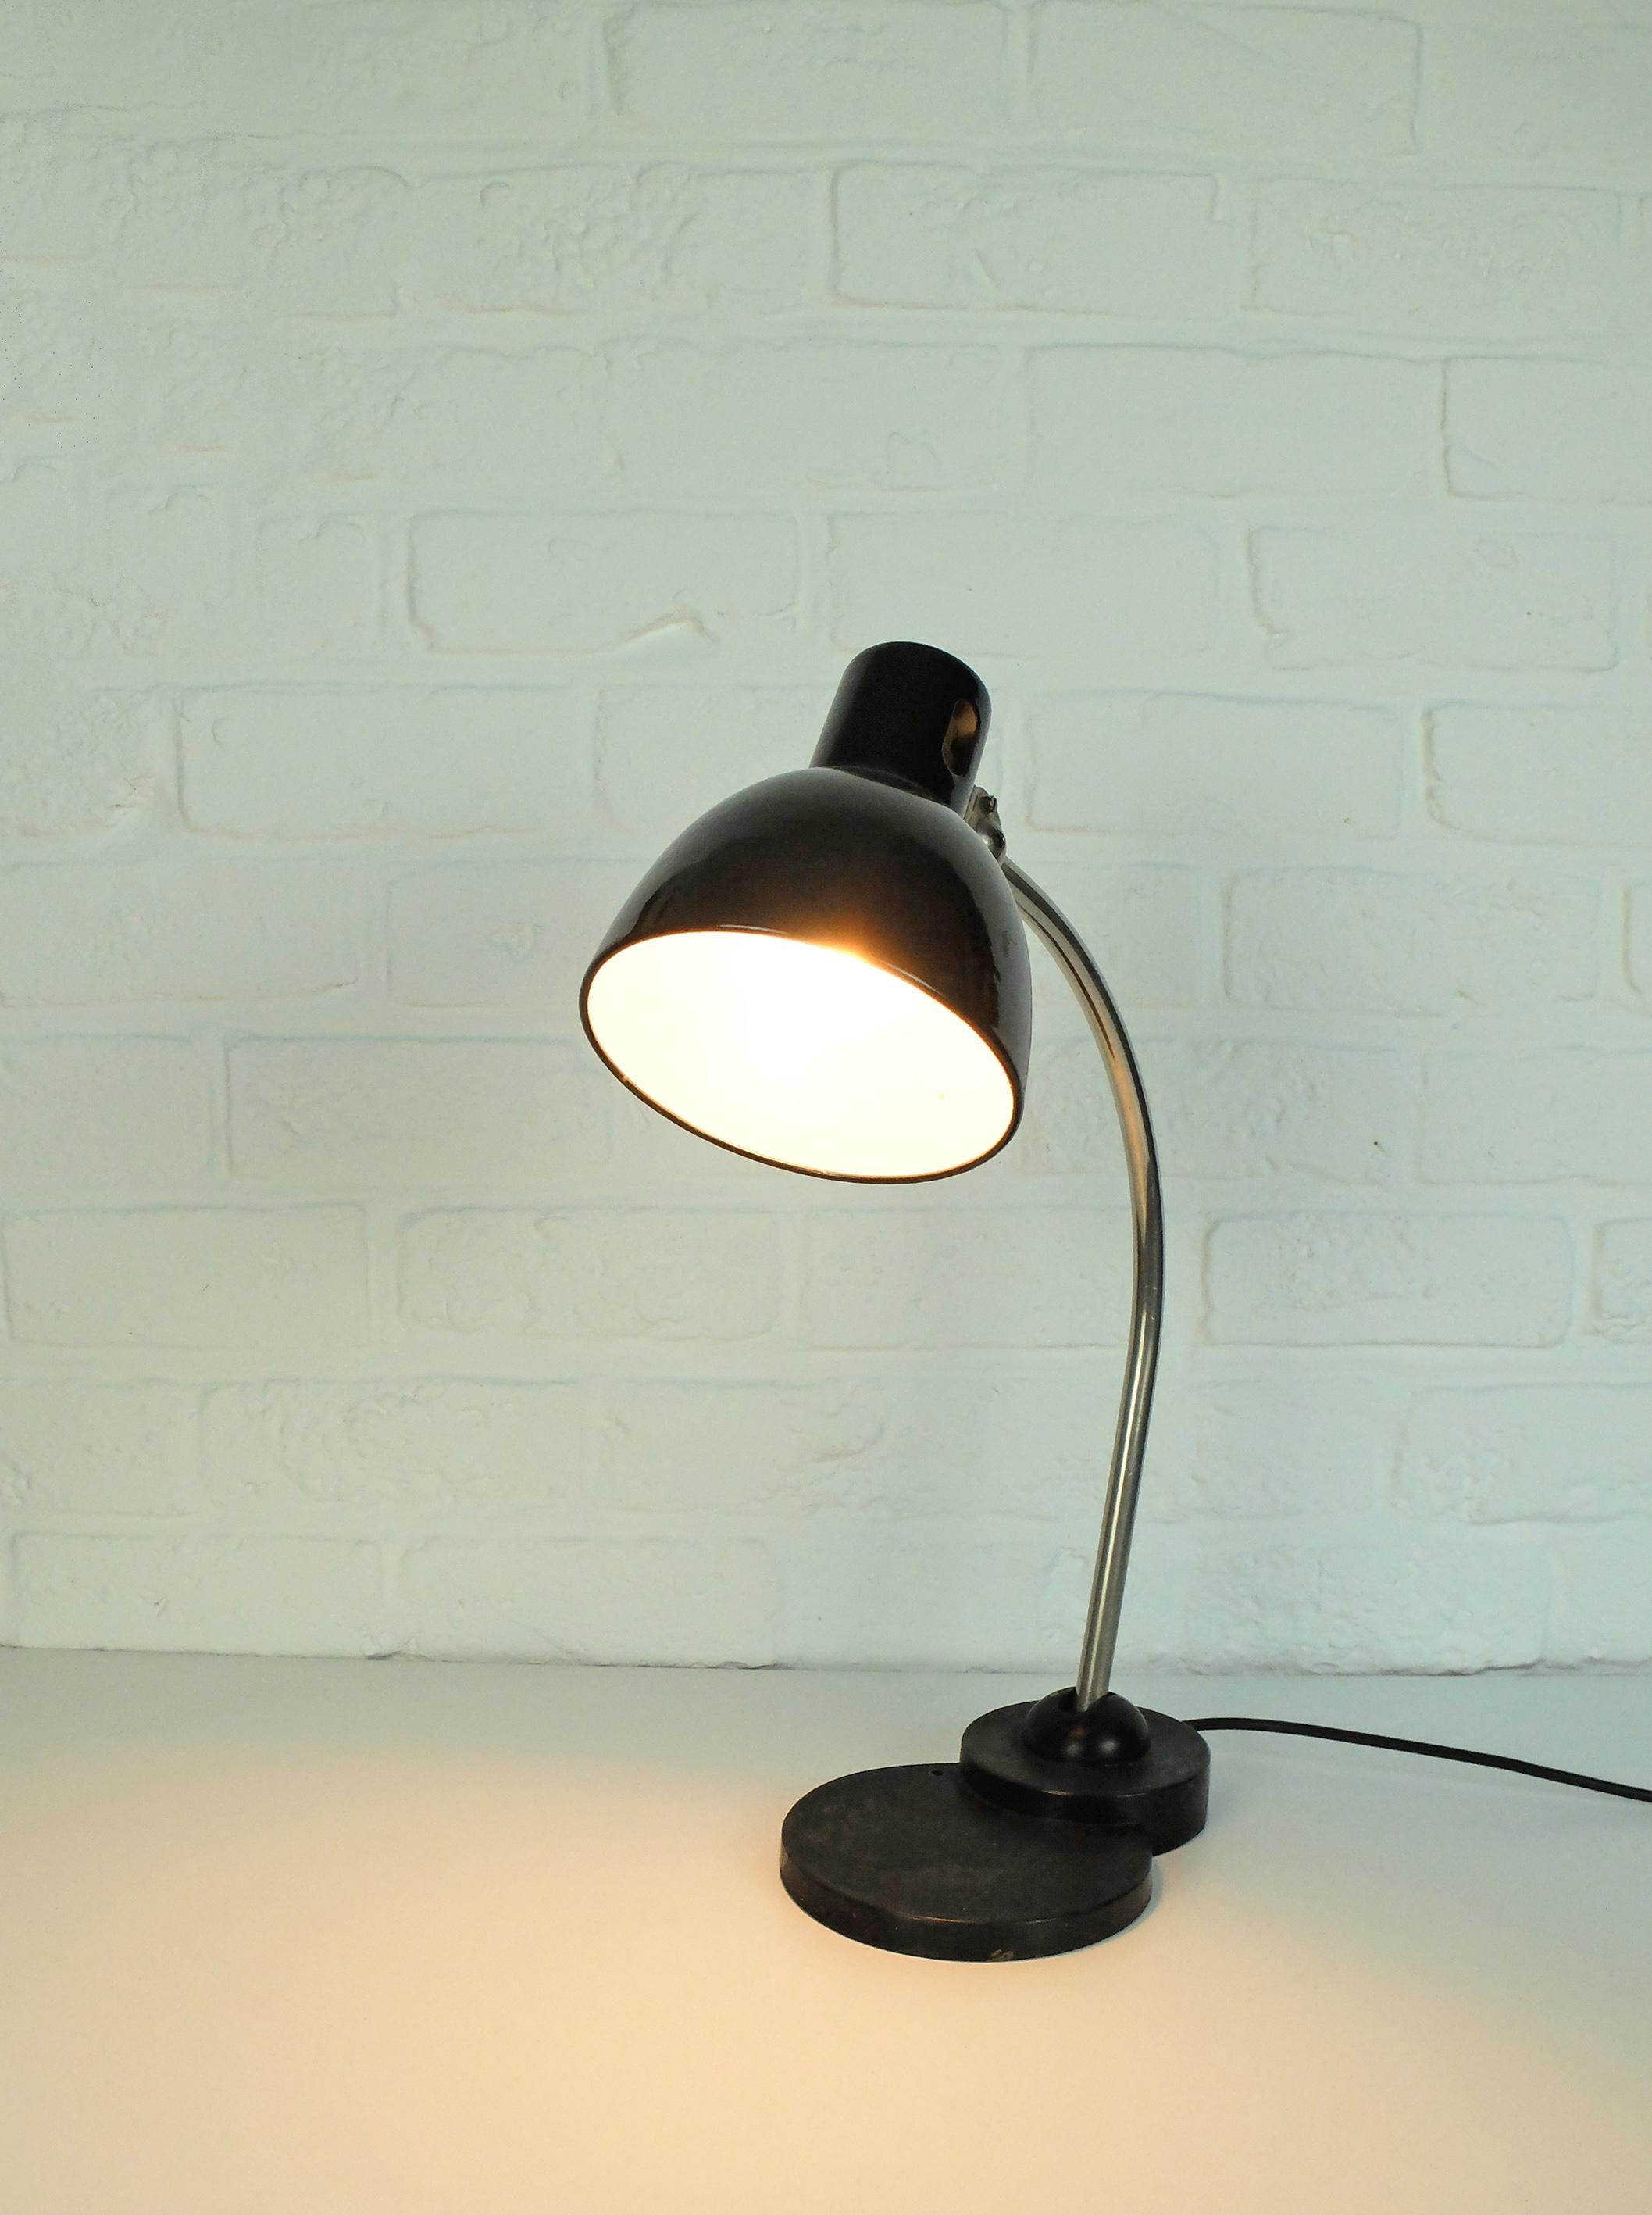 Zirax table or desk lamp manufactured by Dr. Ing. Schneider & Co, Frankfurt. Typical Bauhaus lamp from the 1930s.

Dr. Ing. Schneider & Co was founded in 1911 in Frankfurt am Main, by the brothers John J. Schneider Carl August Schneider and the